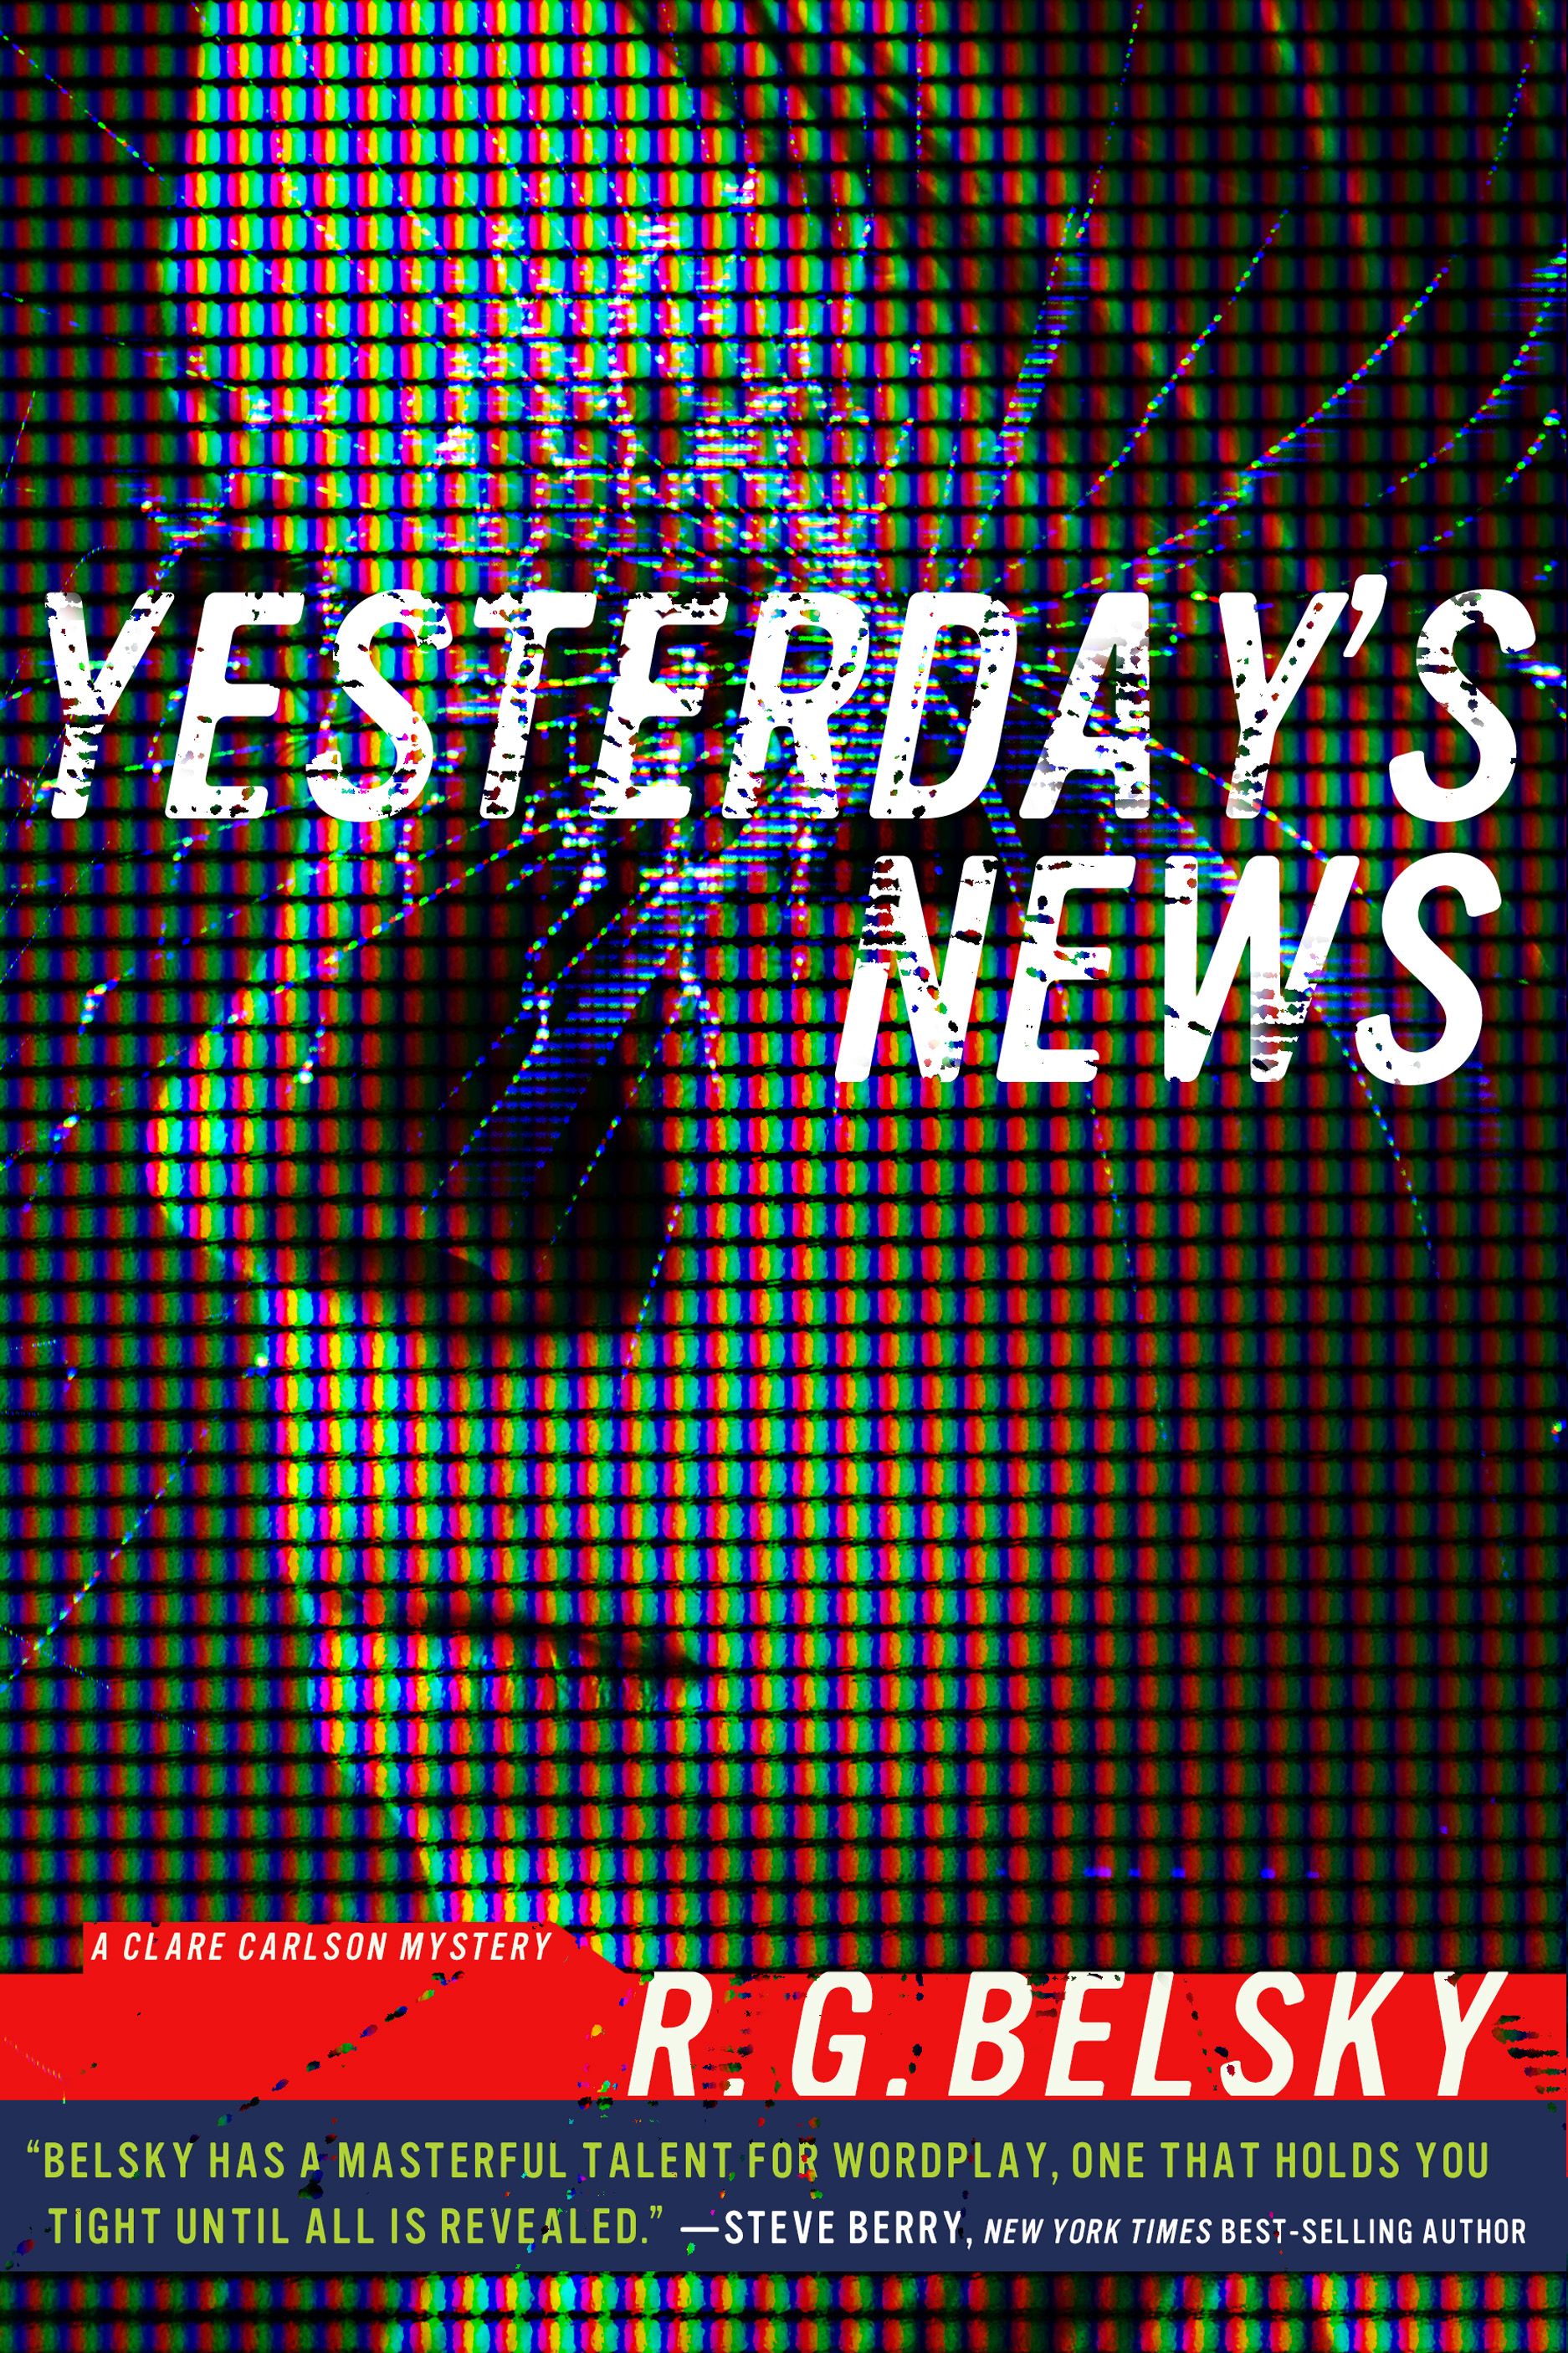 Yesterday's News by R.G. Belsky